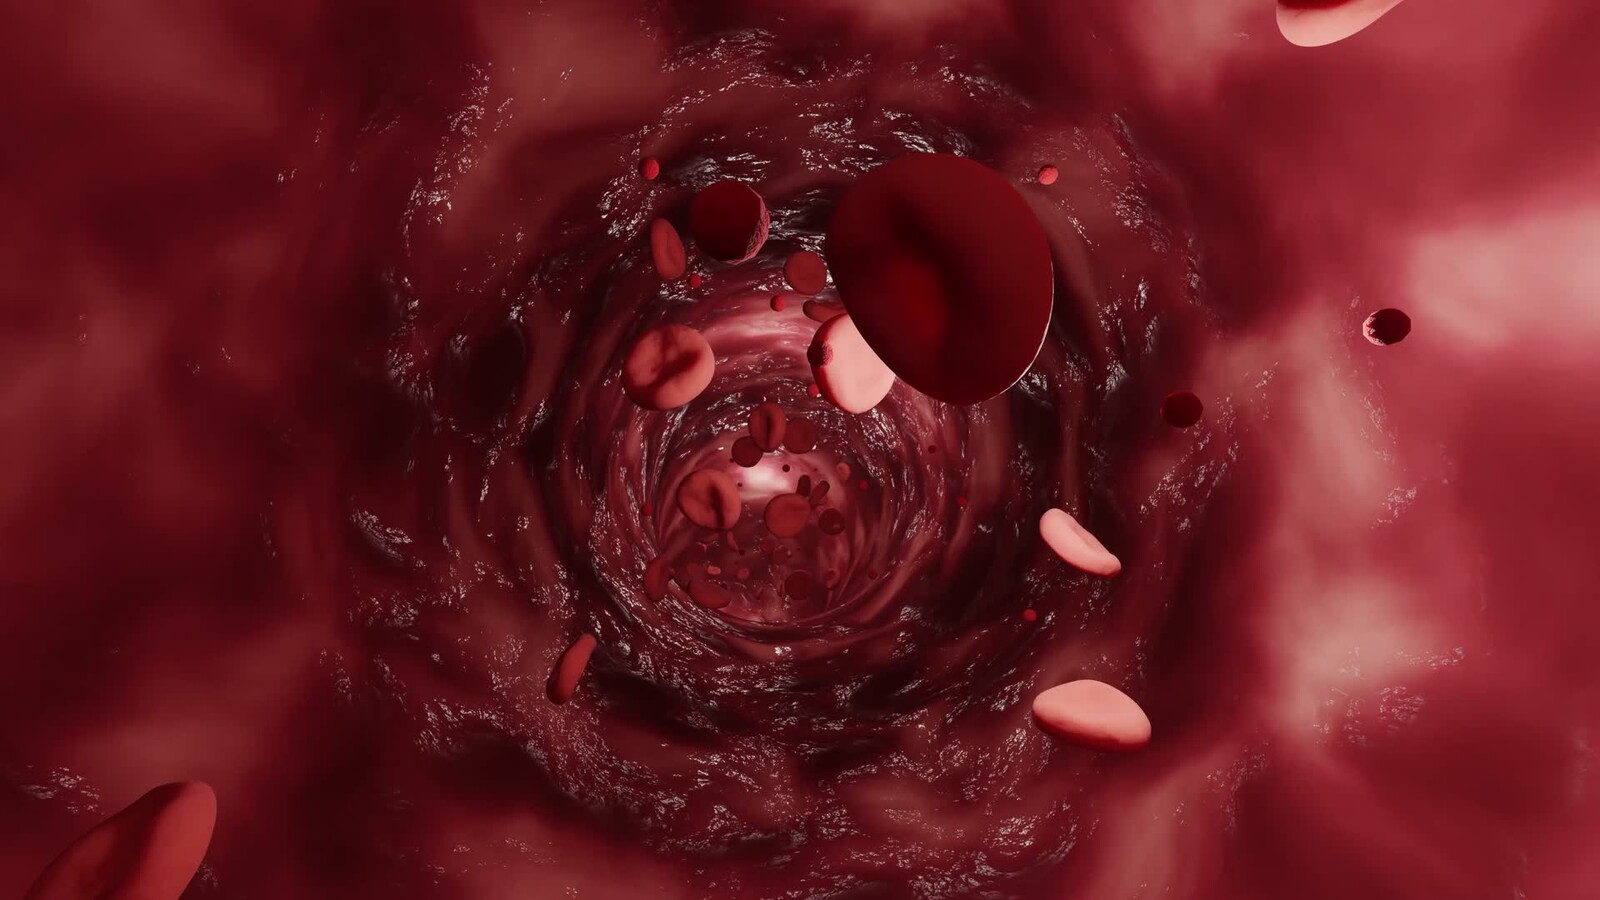 red blood cells flowing in an artery or veine - 3D animation